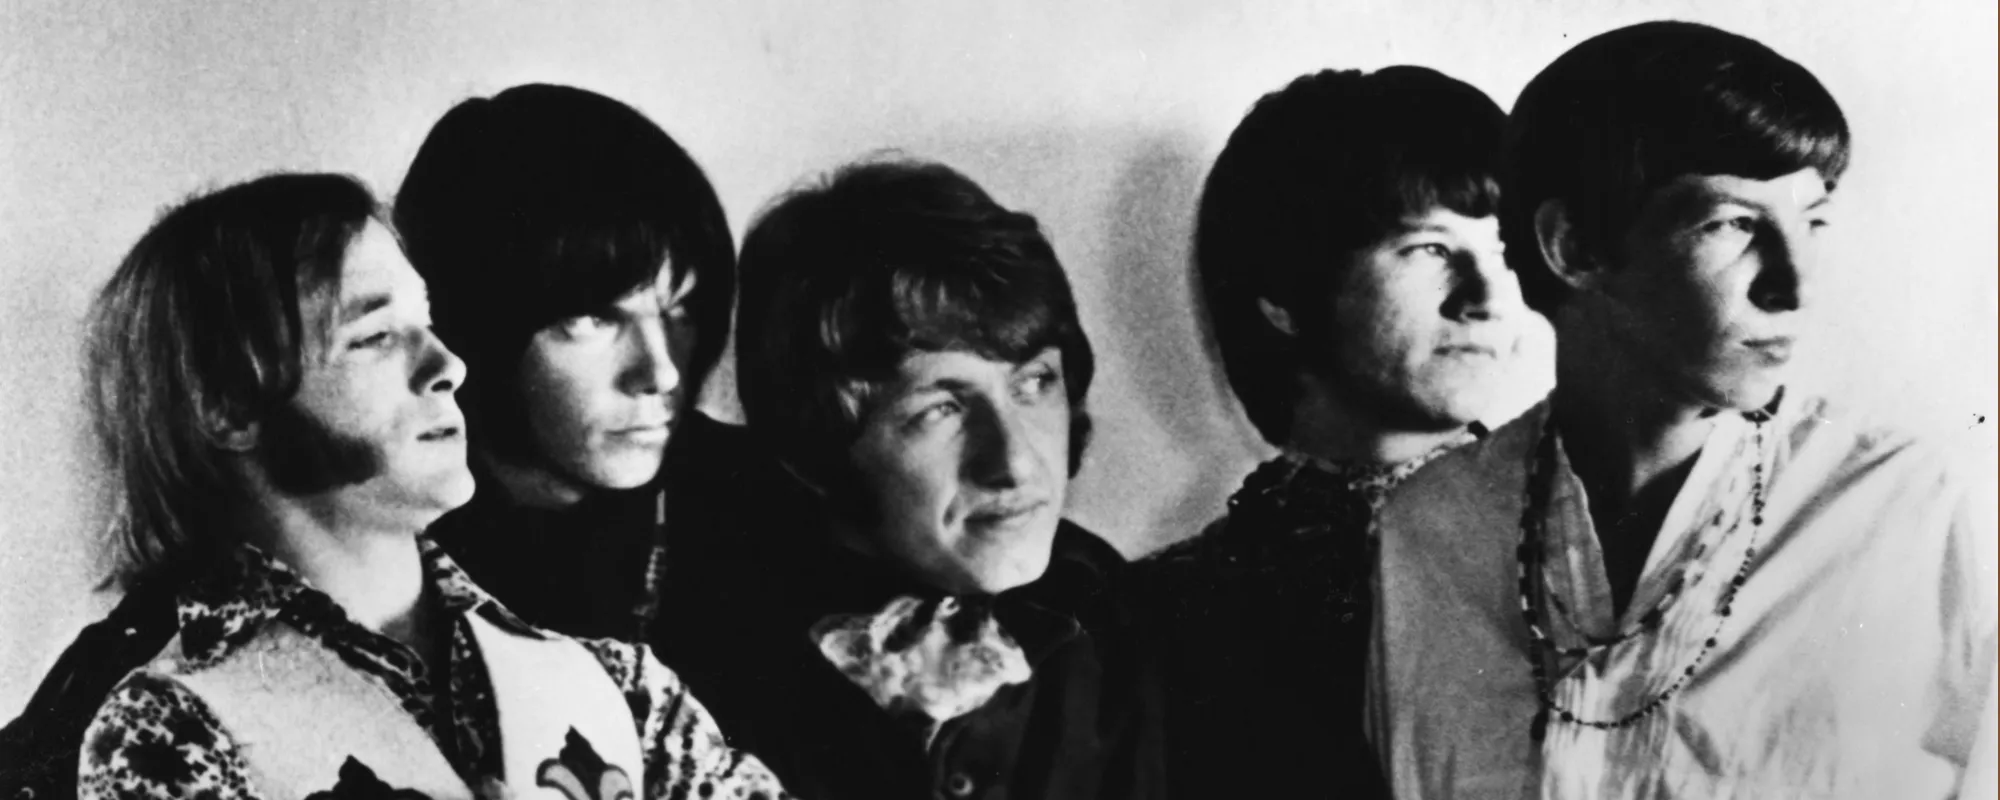 Meaning Behind Buffalo Springfield’s Protest Anthem “For What It’s Worth”